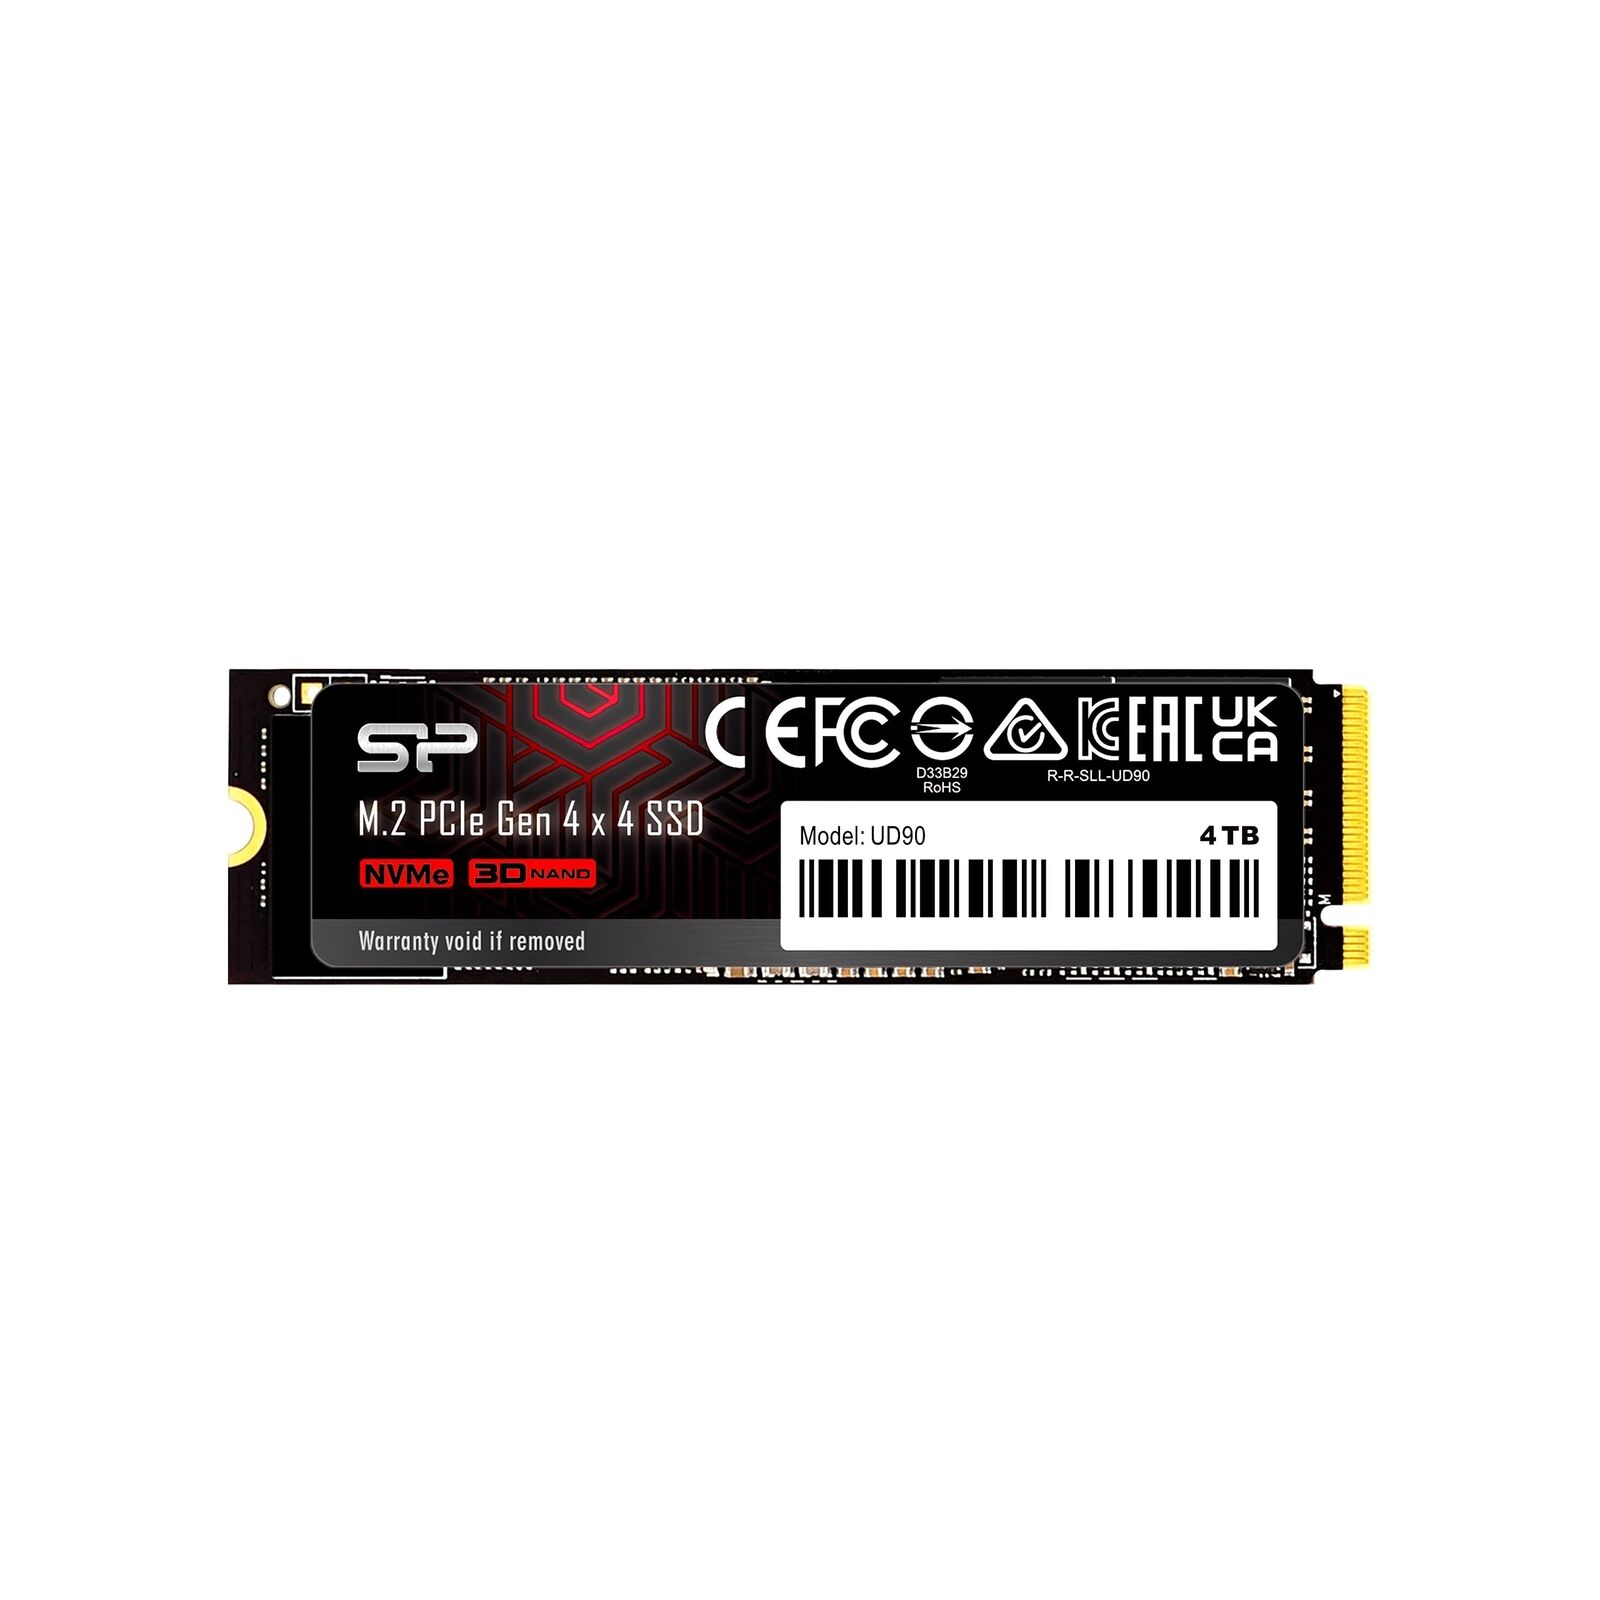 Silicon Power 4TB UD90 NVMe 4.0 Gen4 PCIe M.2 SSD R/W up to 5,000/4,500 MB/s ...